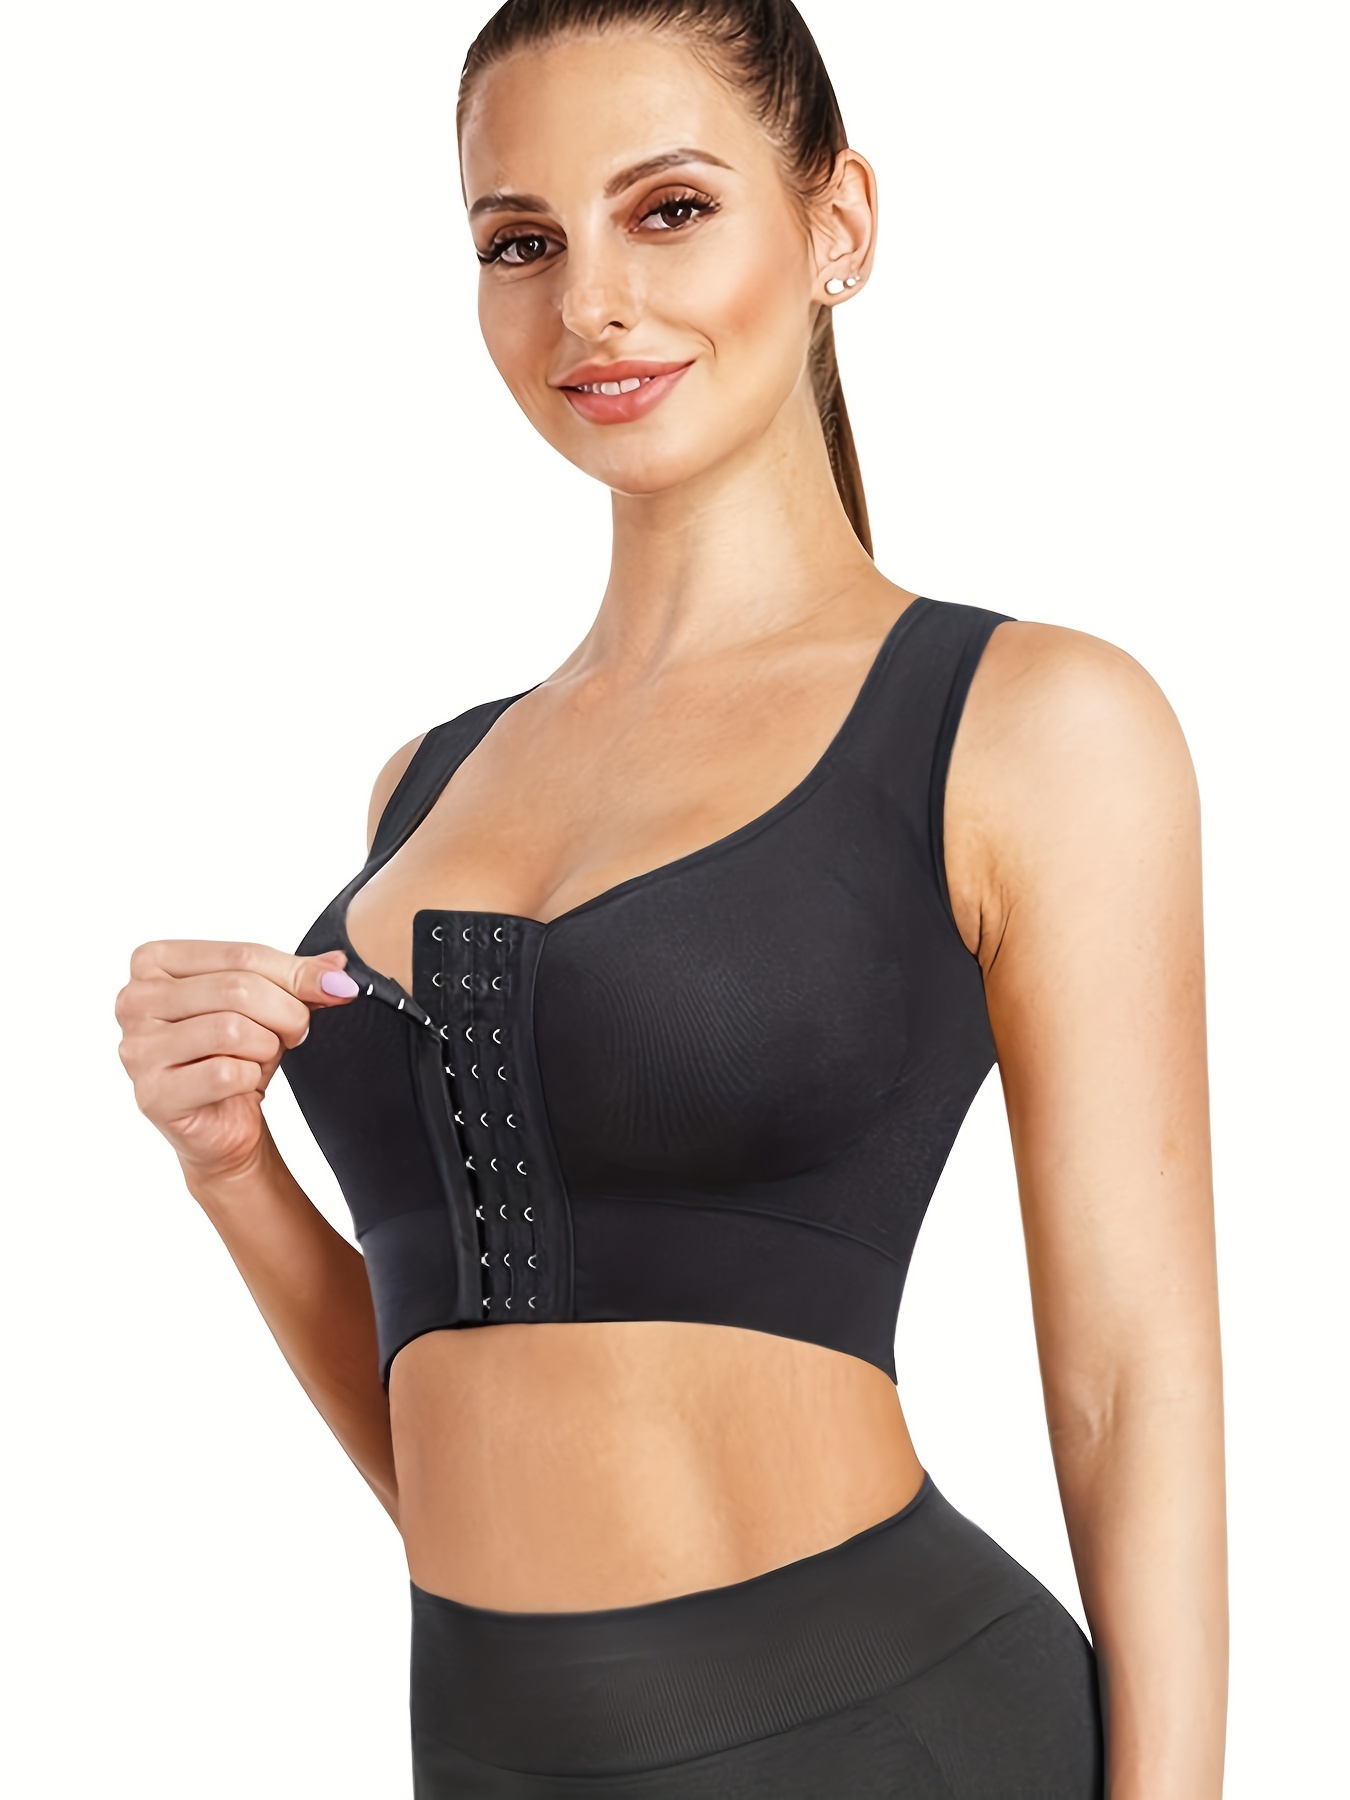 Summer Zip Front Sports Bra Llu 219 Front Zipper Tight Fit, Solid Color,  Nude, Perfect For Outdoor Fitness And Yoga From Zhangxuanang009, $18